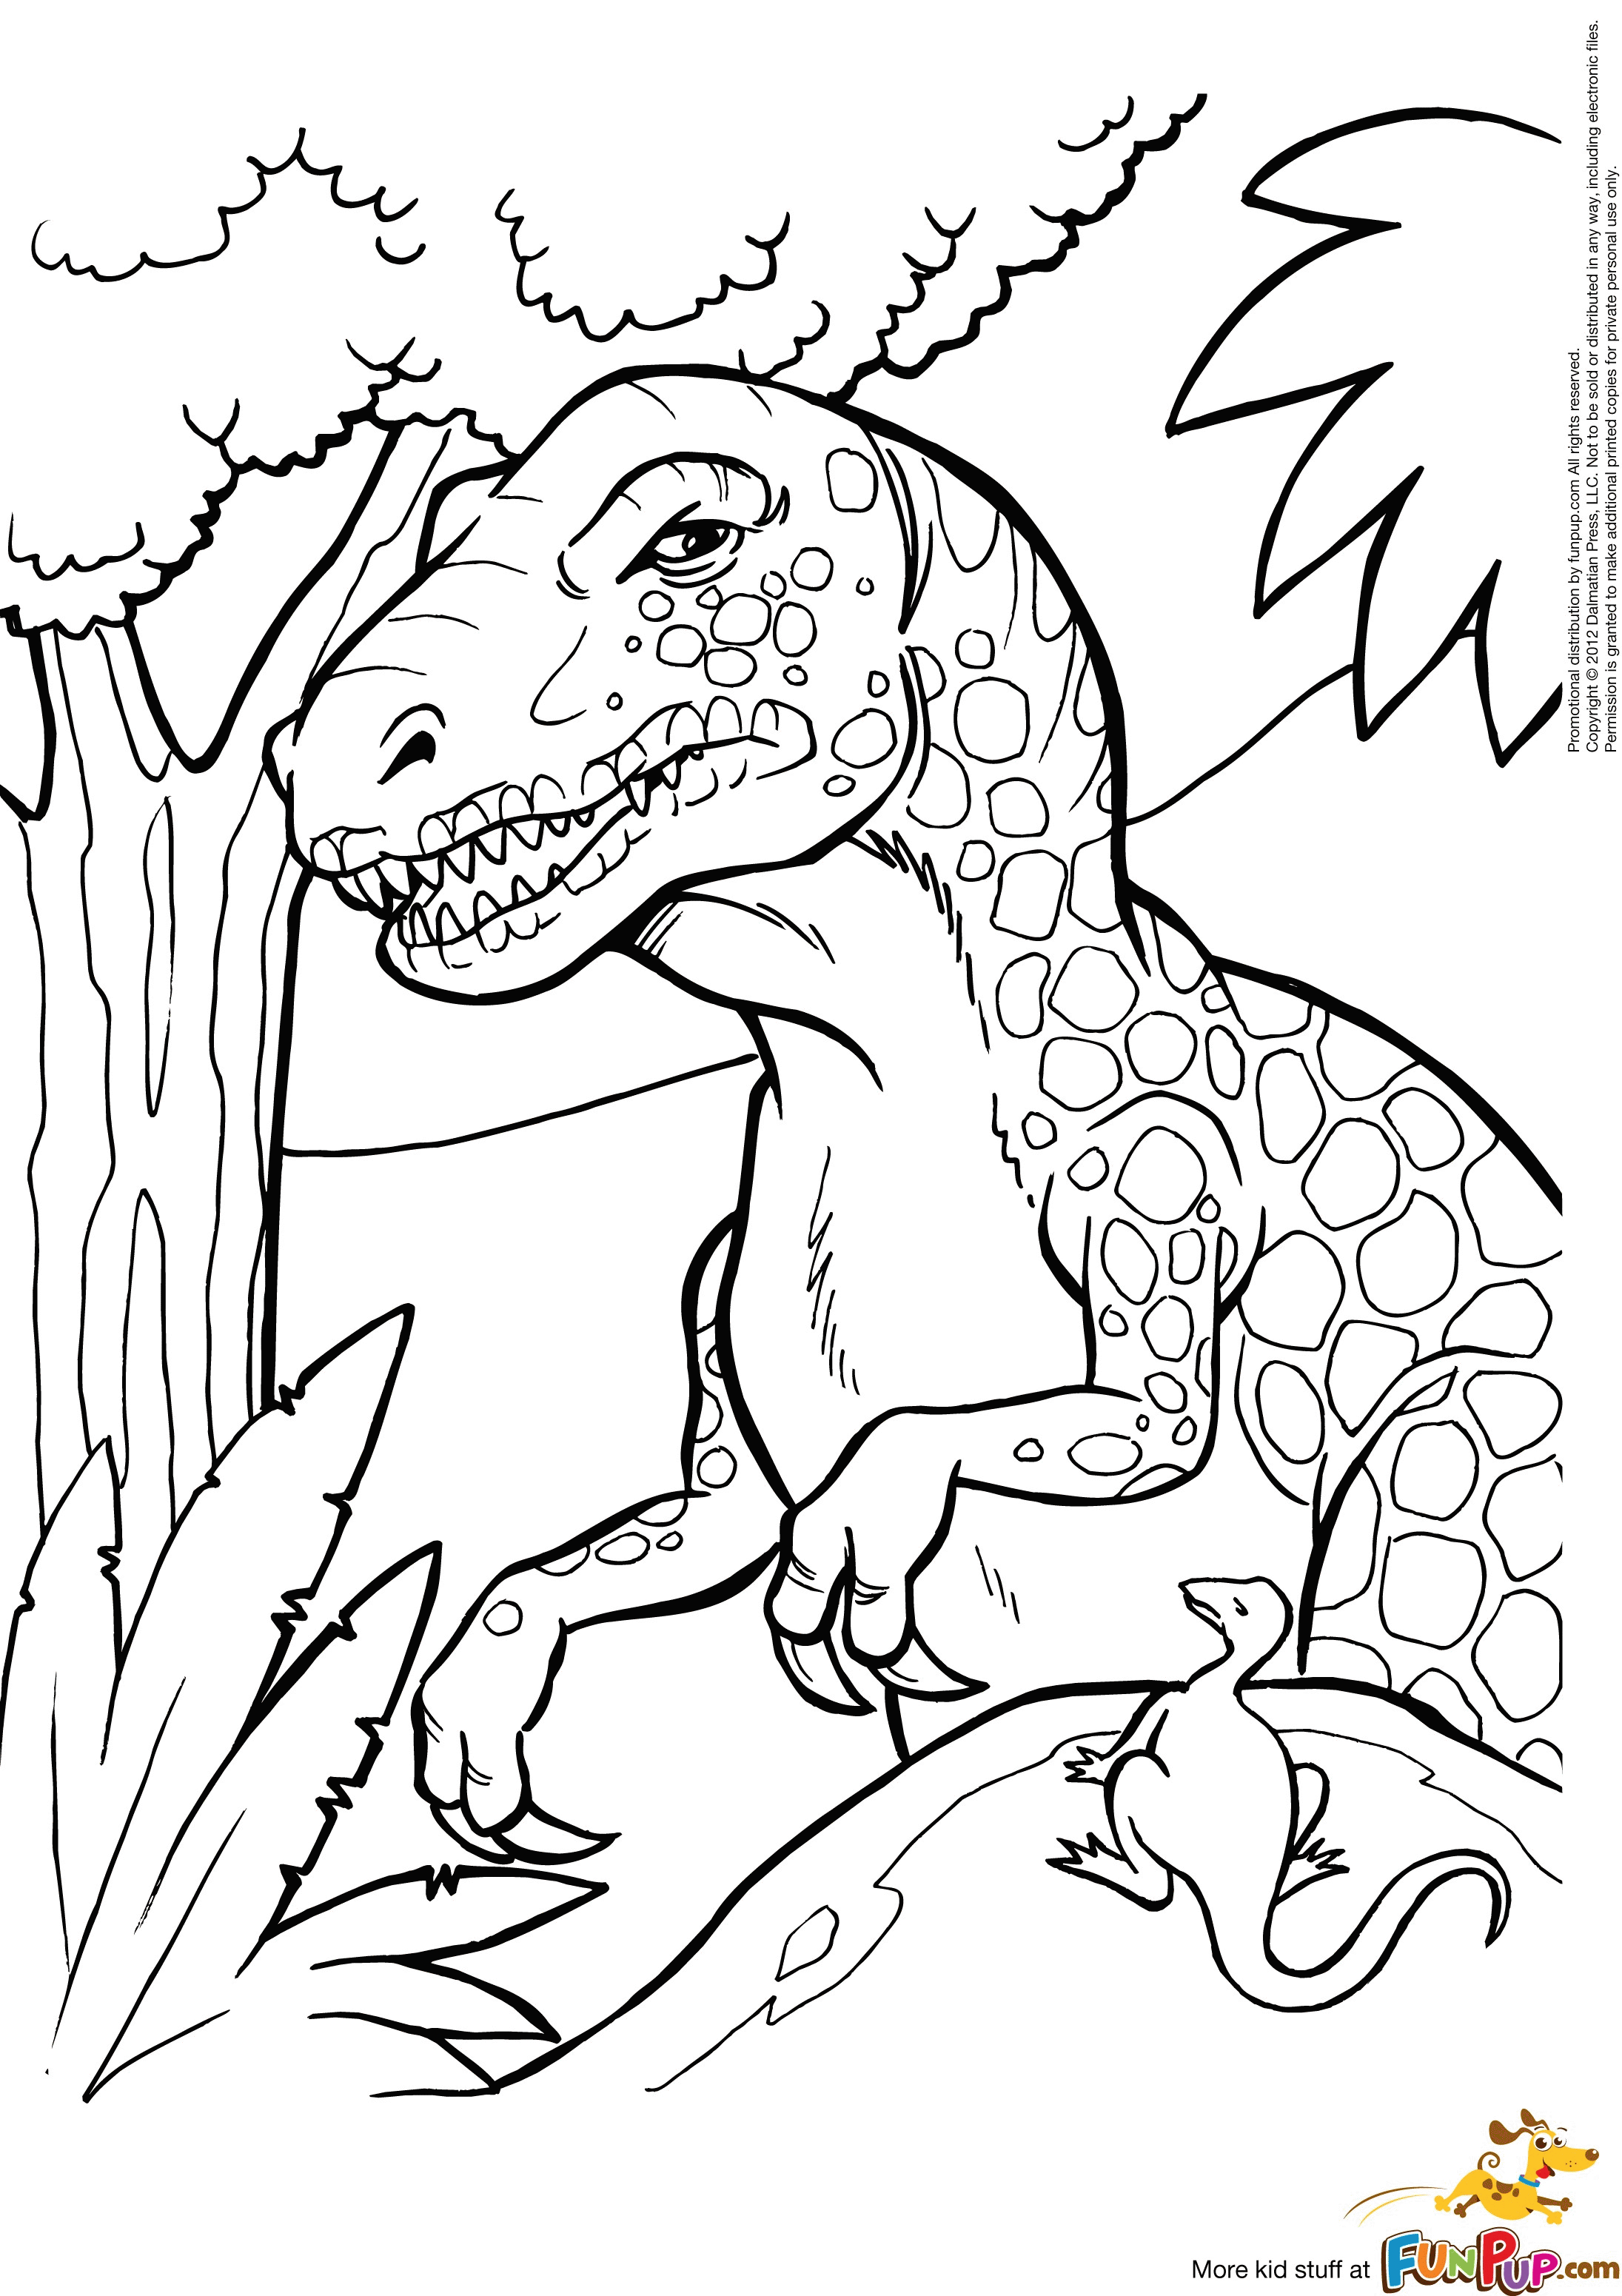 T Rex Coloring Pages to print #6969 T Rex Coloring Pages ...